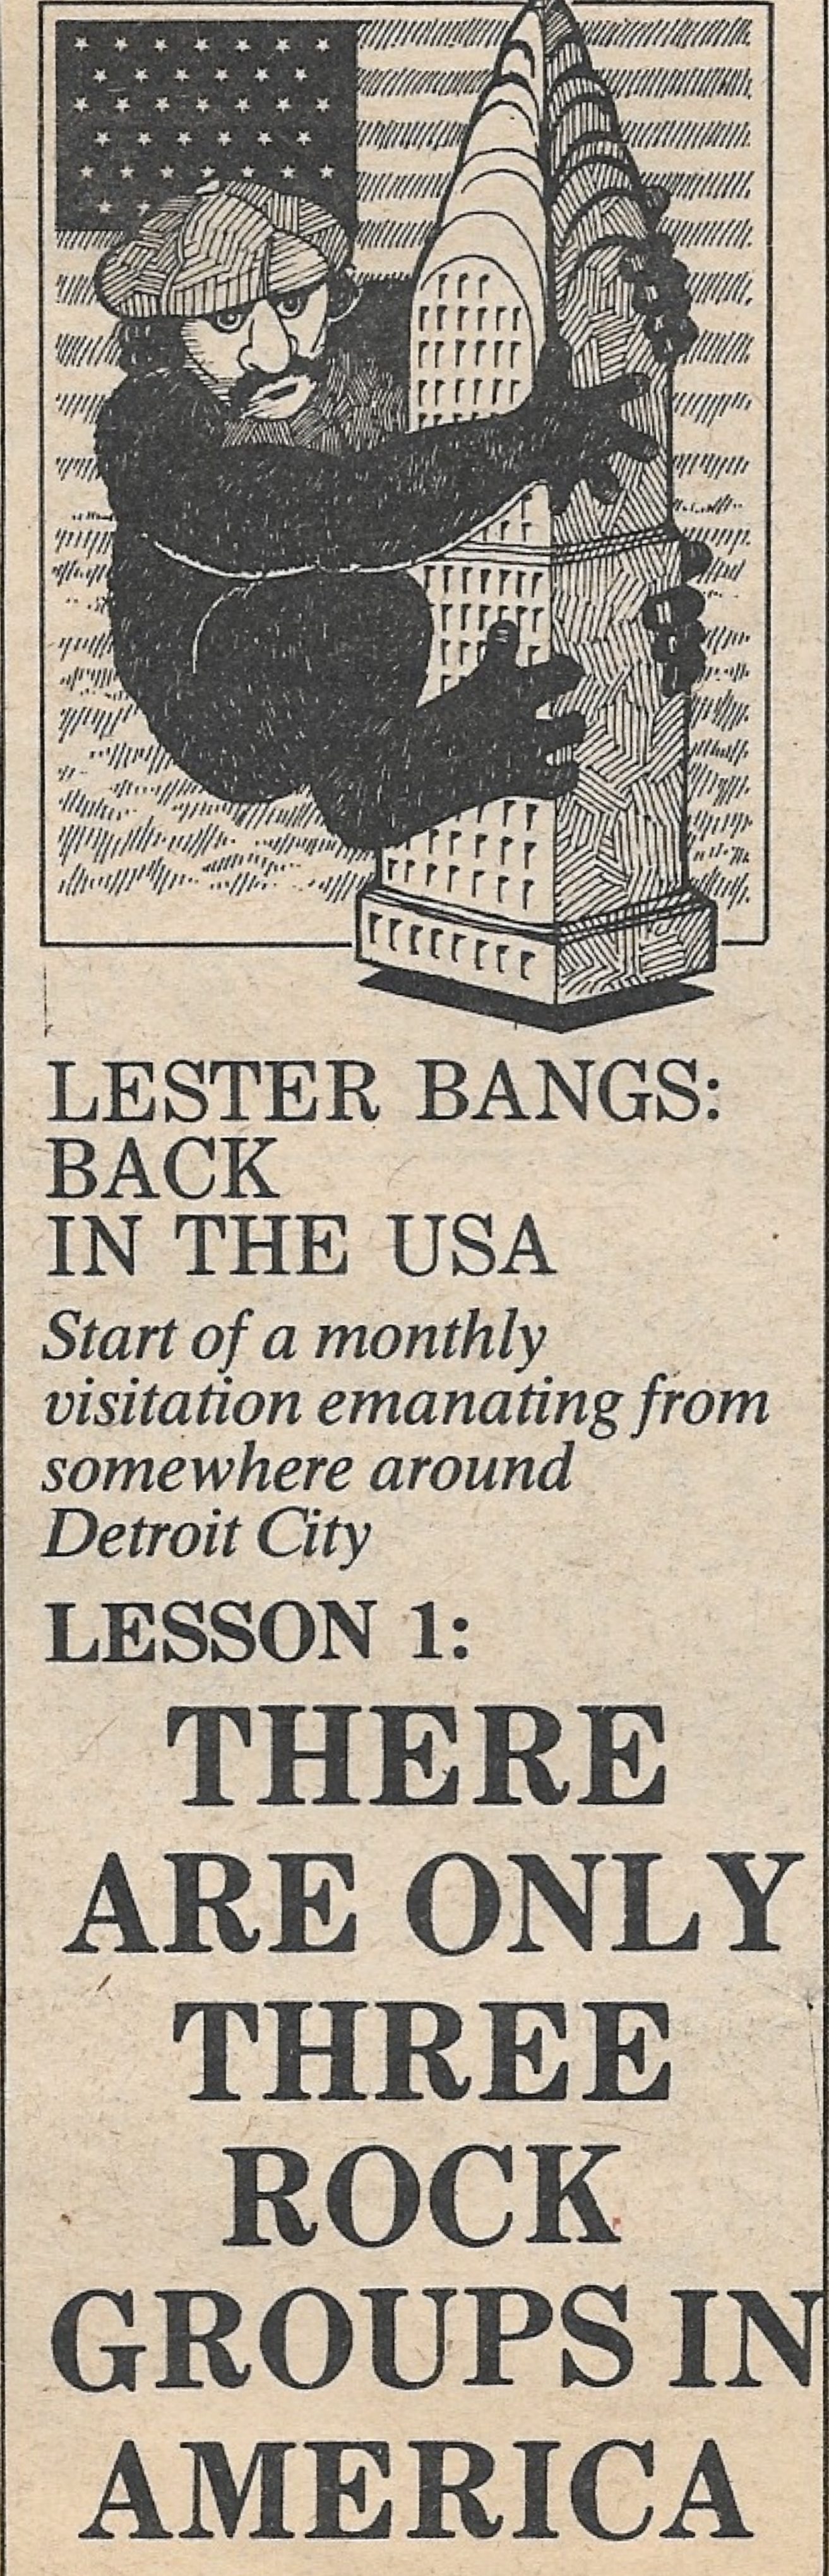 1976 "Back In the USA" graphic